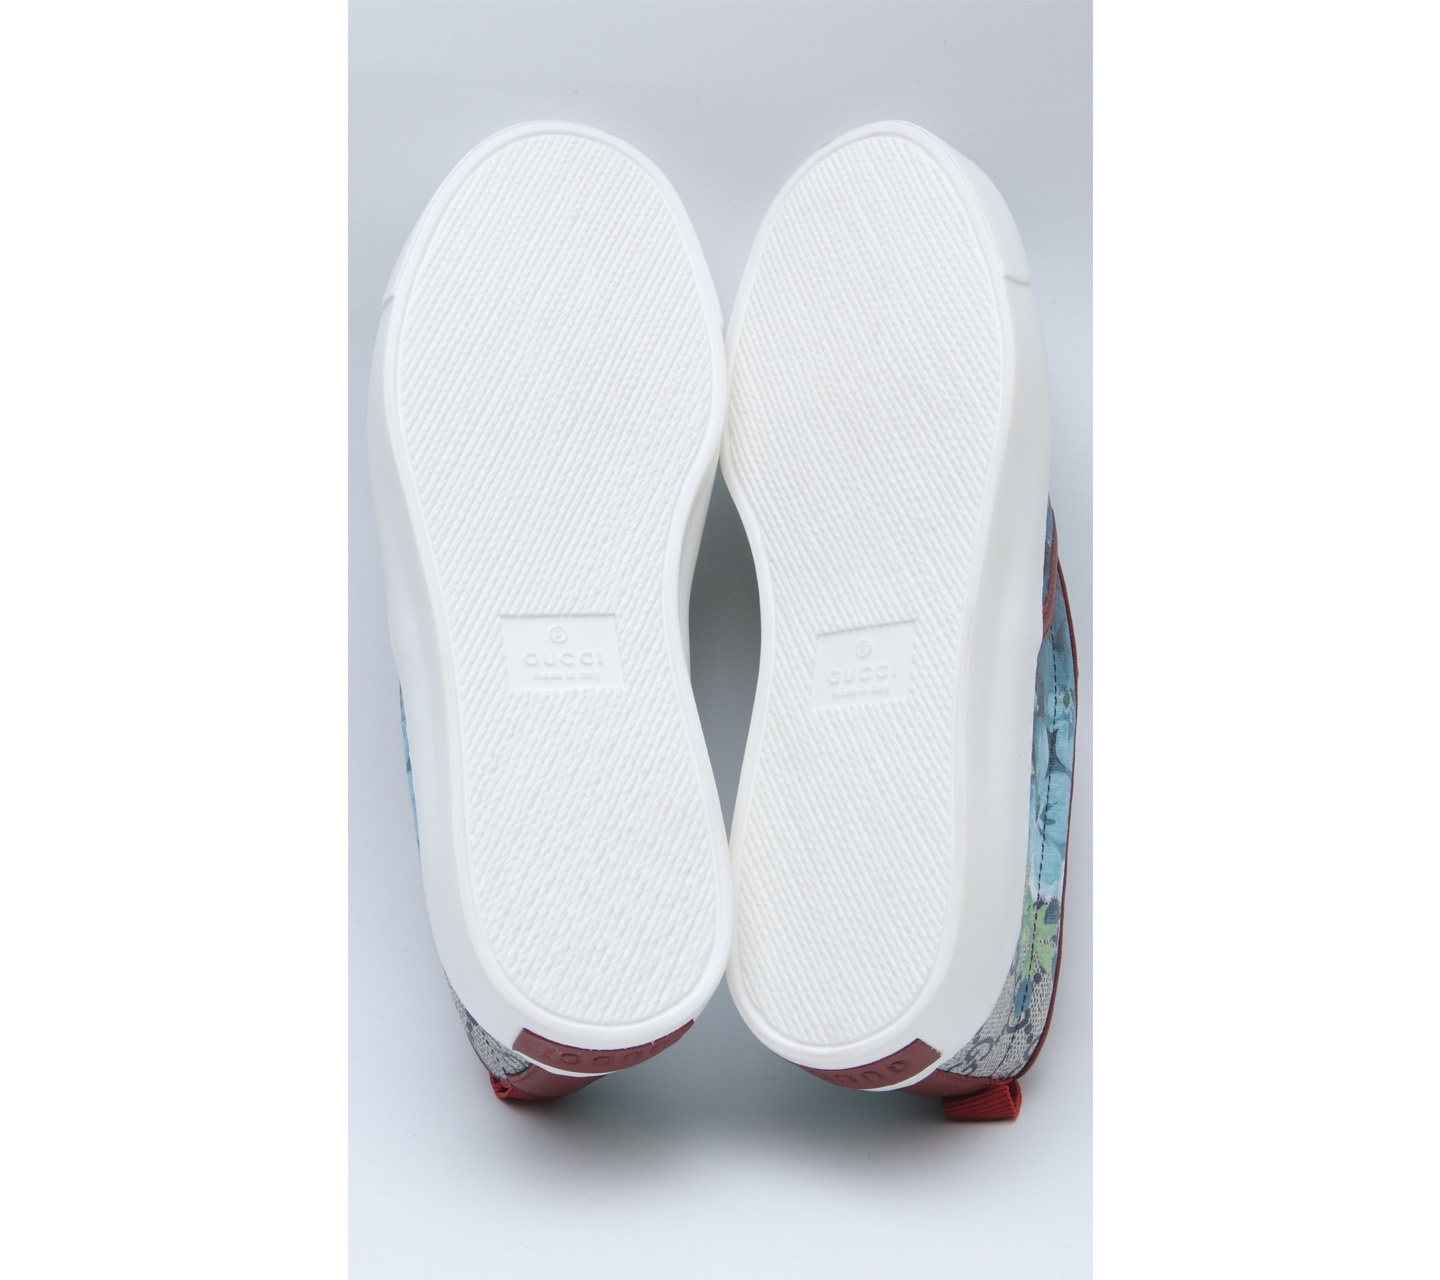 Gucci Red GG Supreme Blooms Slip On Sneakers